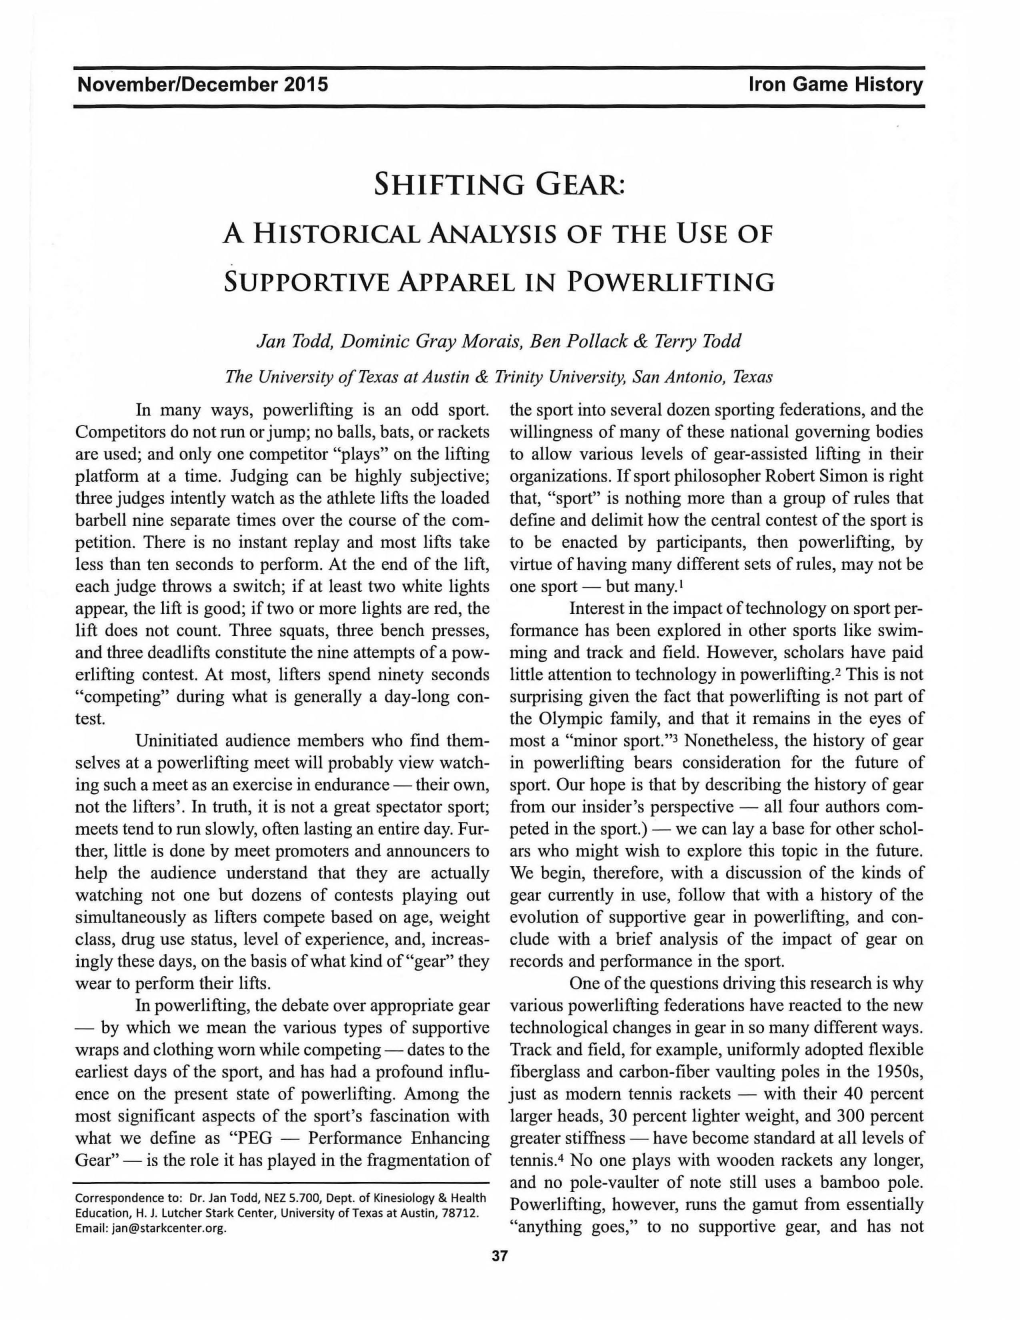 Shifting Gear: a Historical Analysis of the Use of Supportive Apparel in Powerlifting